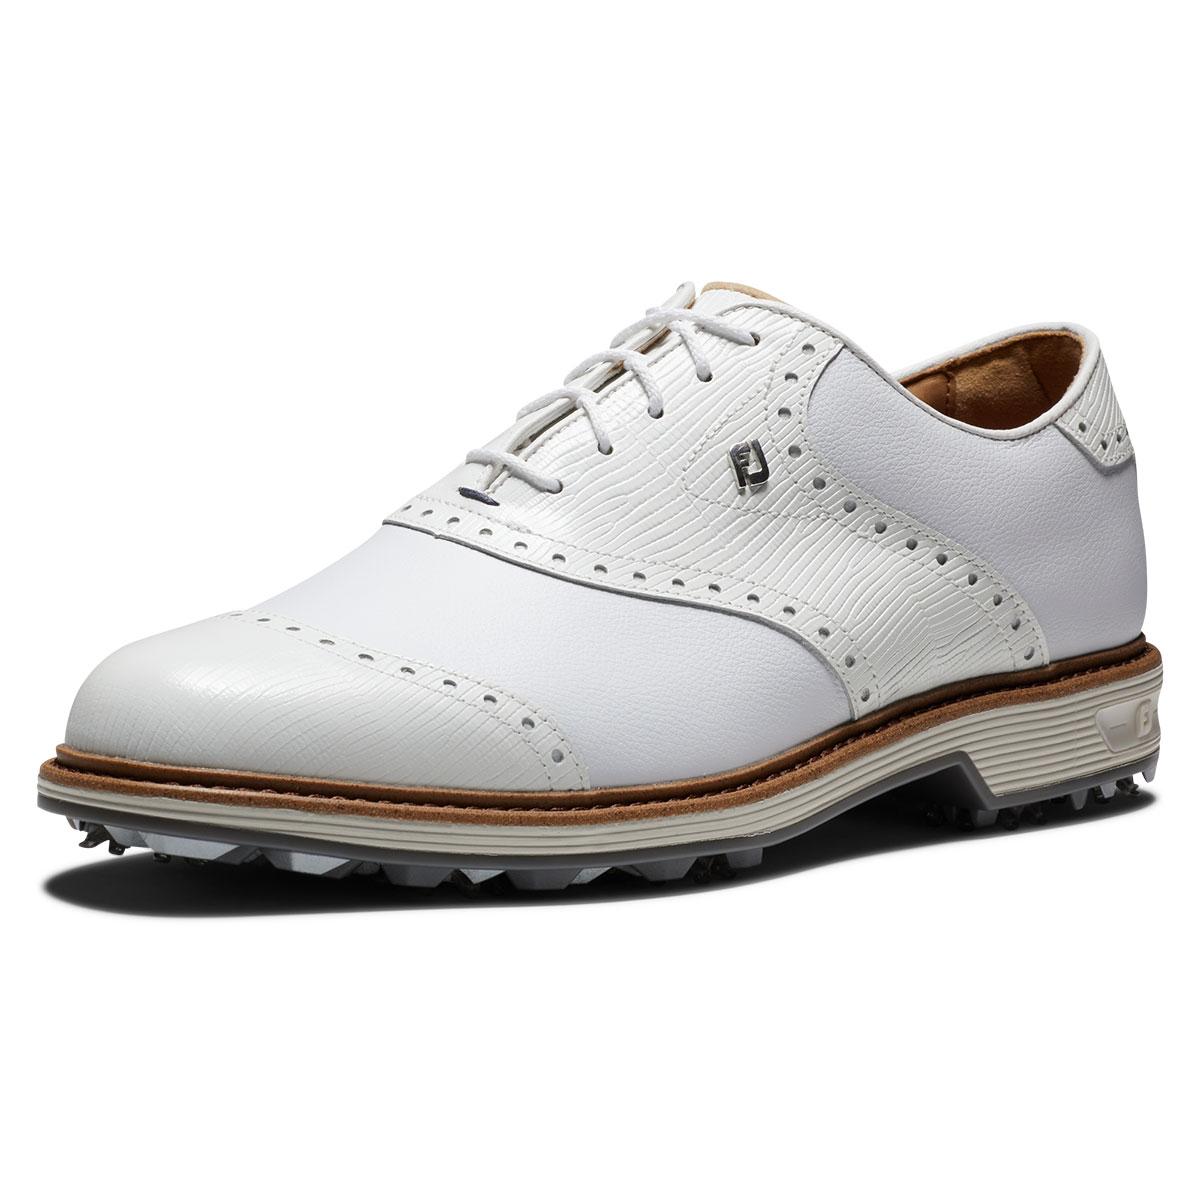 FootJoy Premiere Series Wilcox Waterproof Spiked Golf Shoes from ...